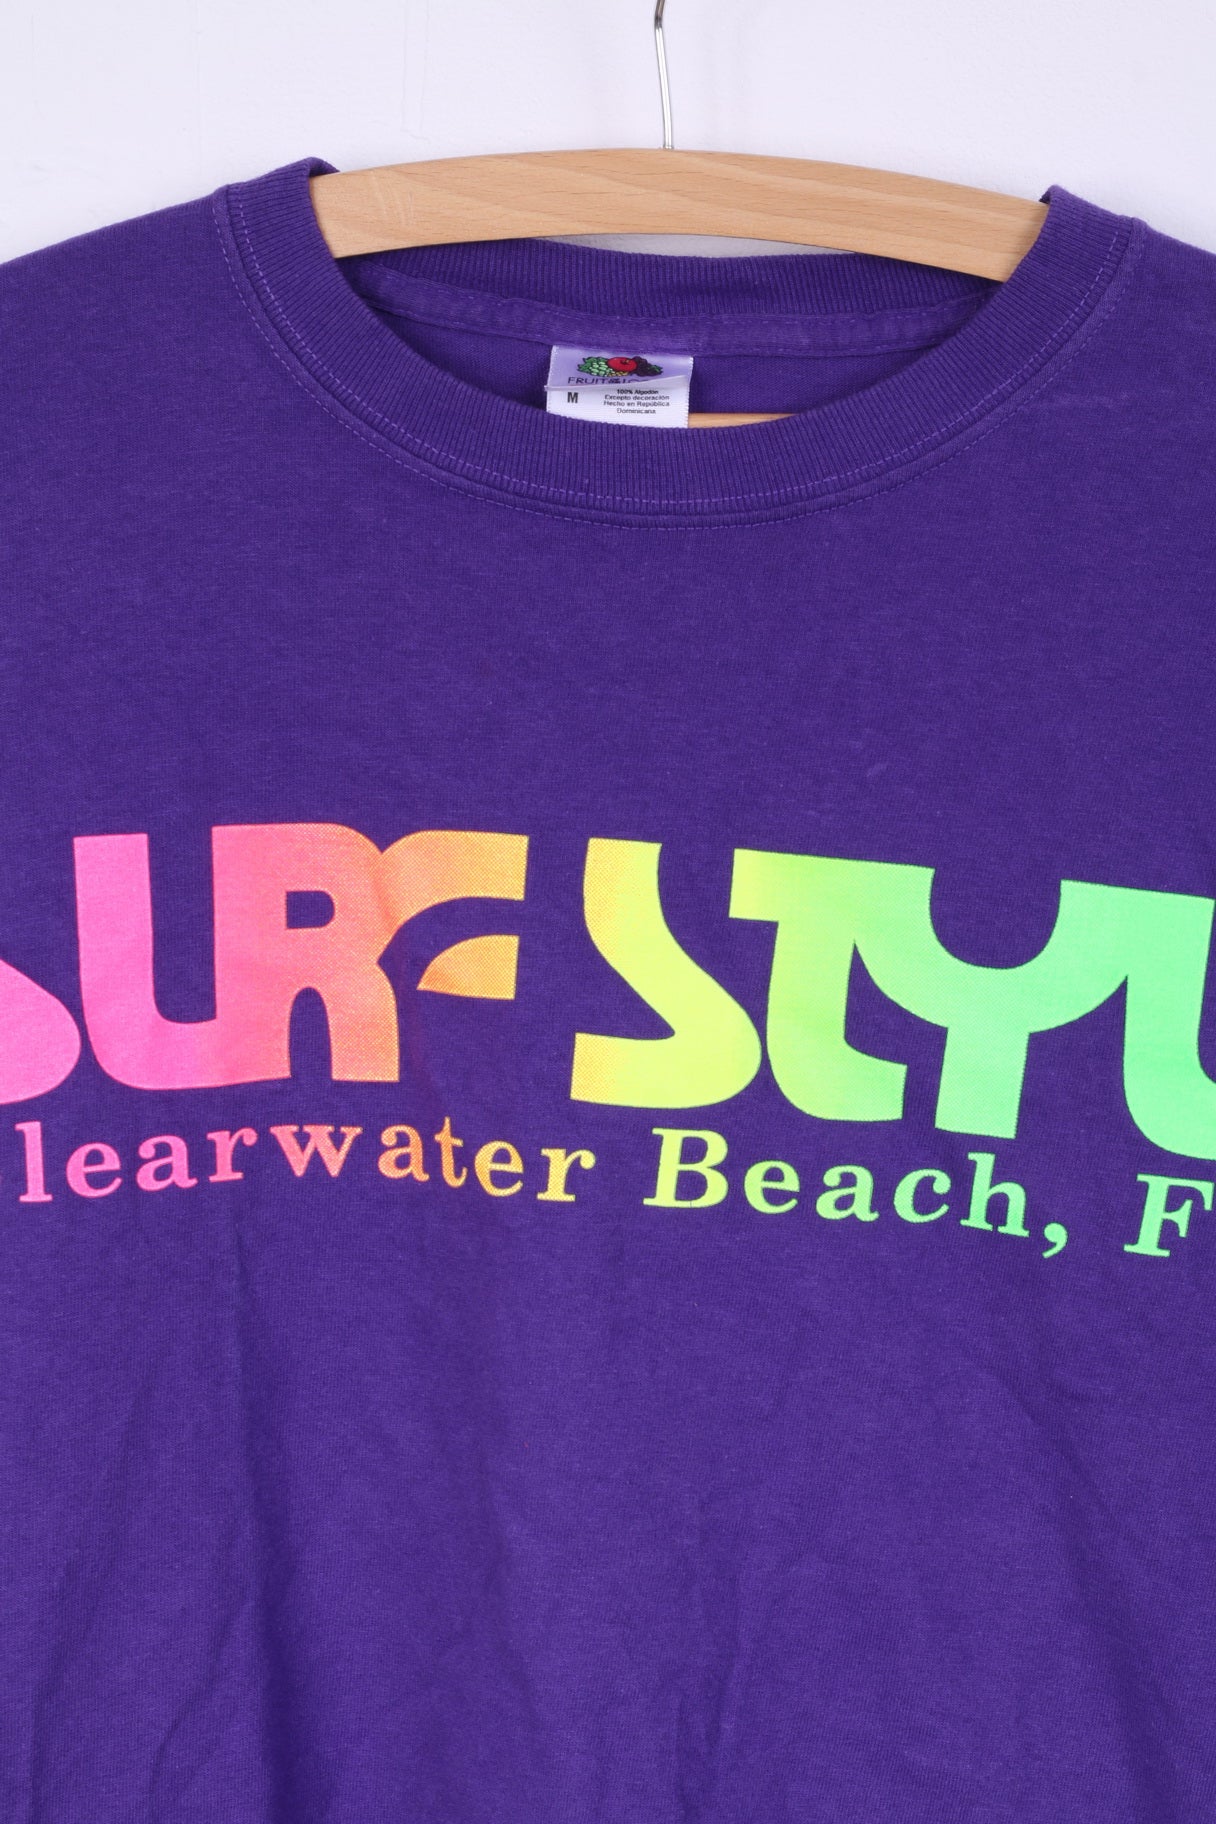 Fruit Of the Loom Surf Style Clear Water Beach Mens M T-Shirt Graphic Cotton Purple Crew Neck